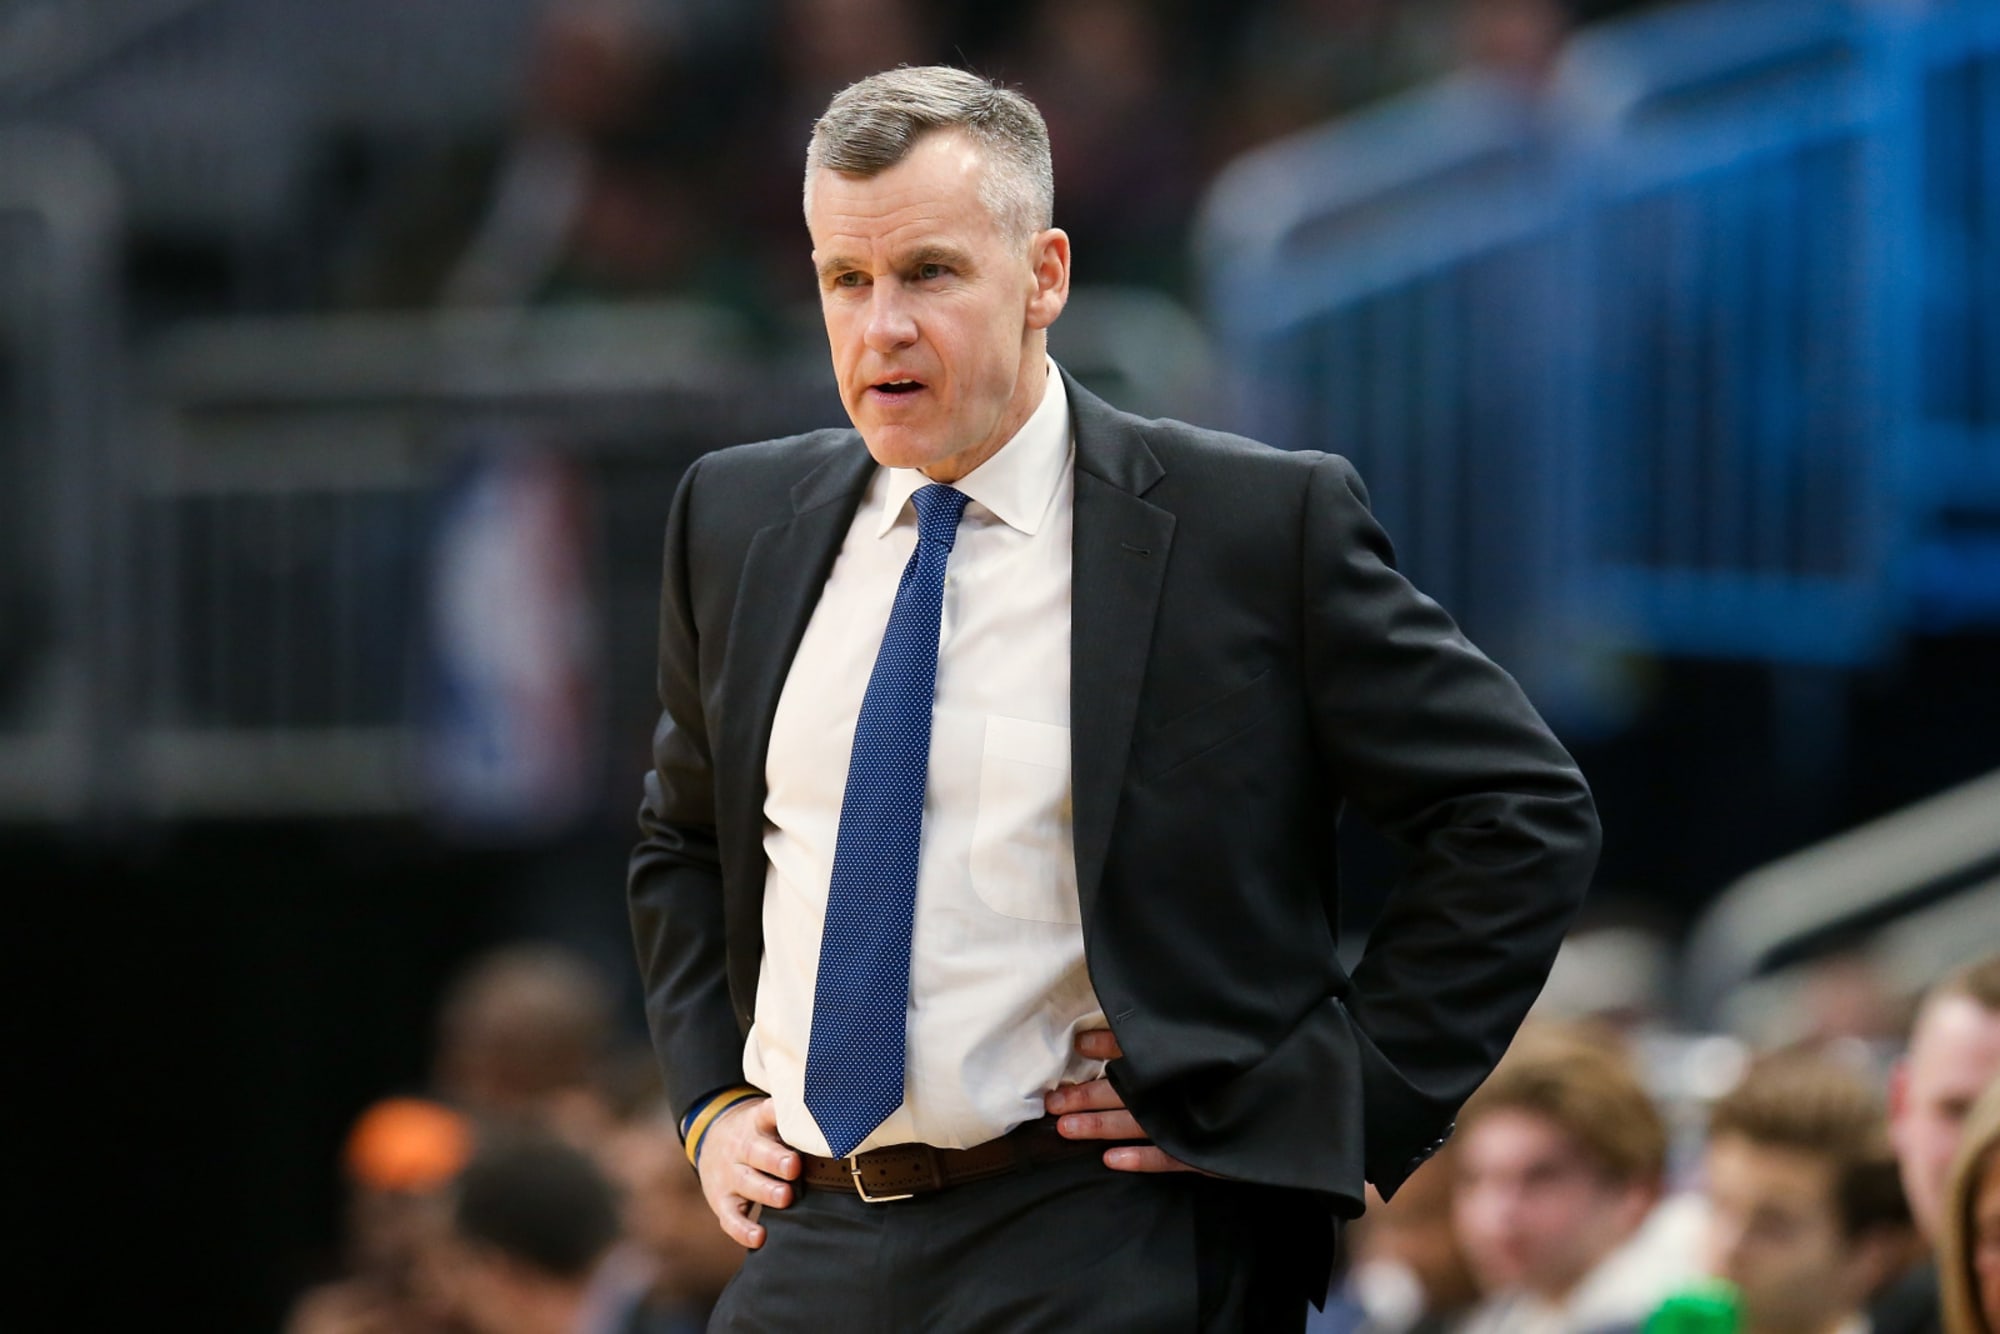 NCAA Basketball: Should free agent Billy Donovan return to college?